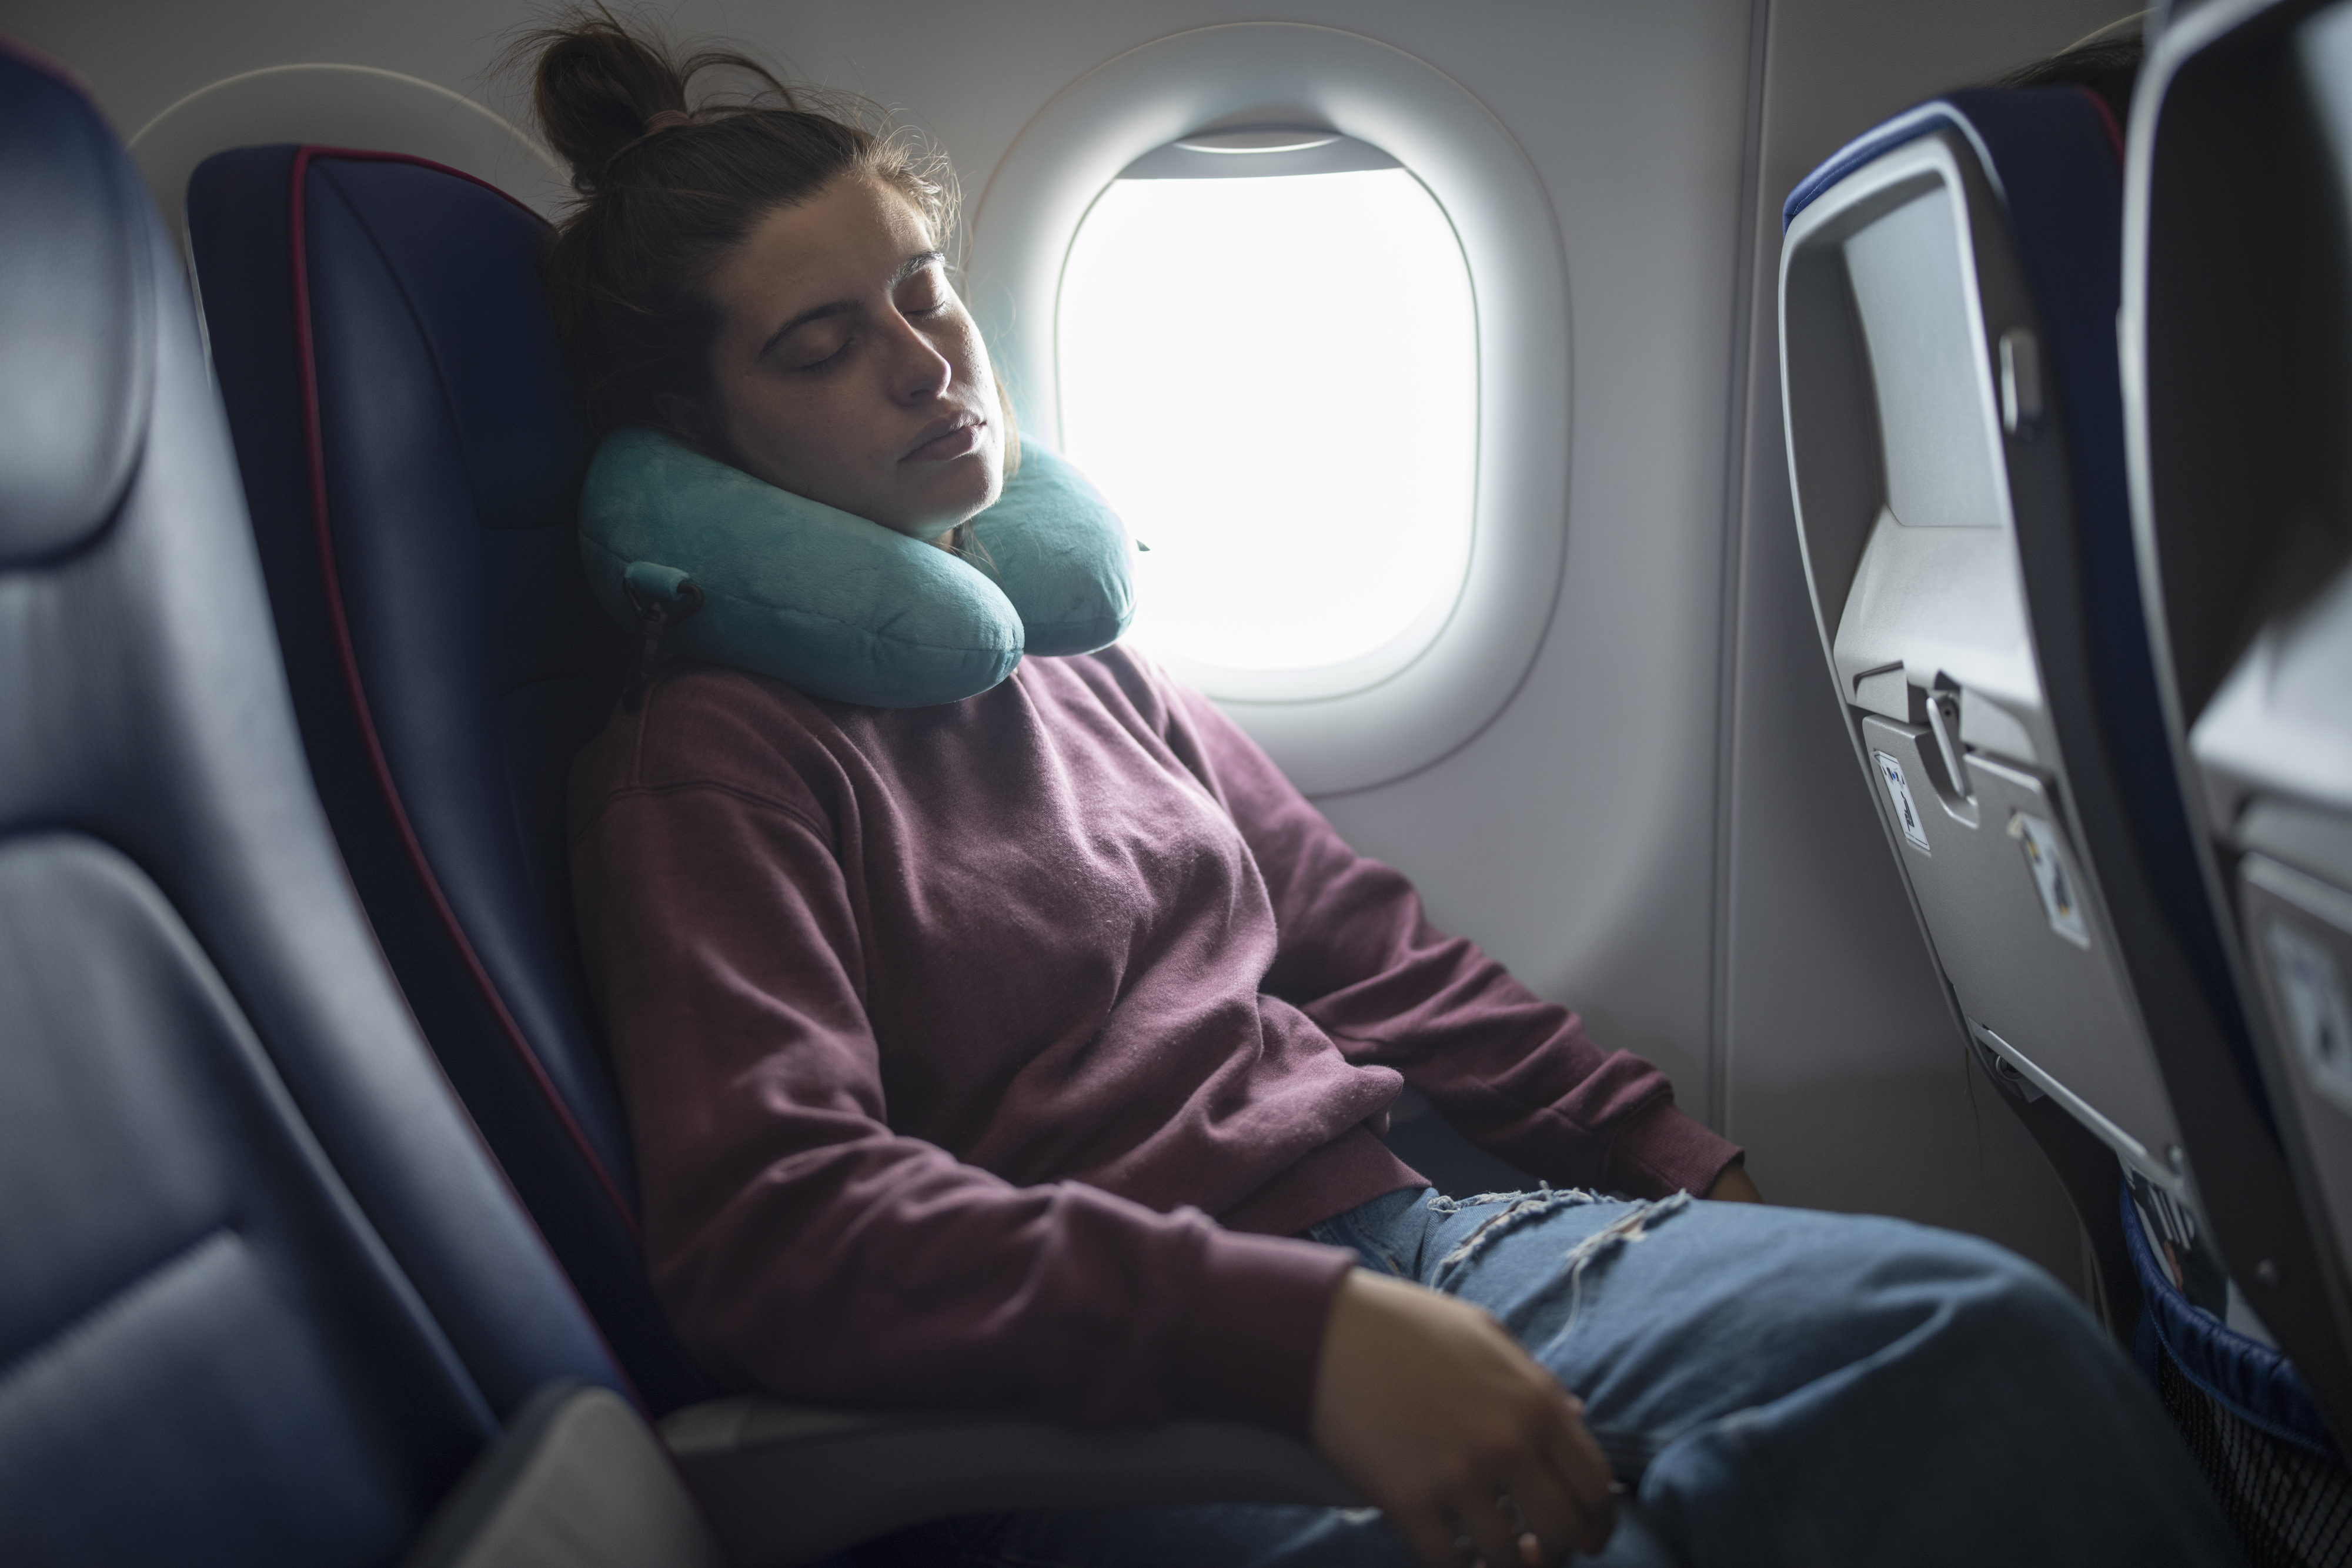 Passenger asleep in an airplane seat with a neck pillow, signaling comfort during travel